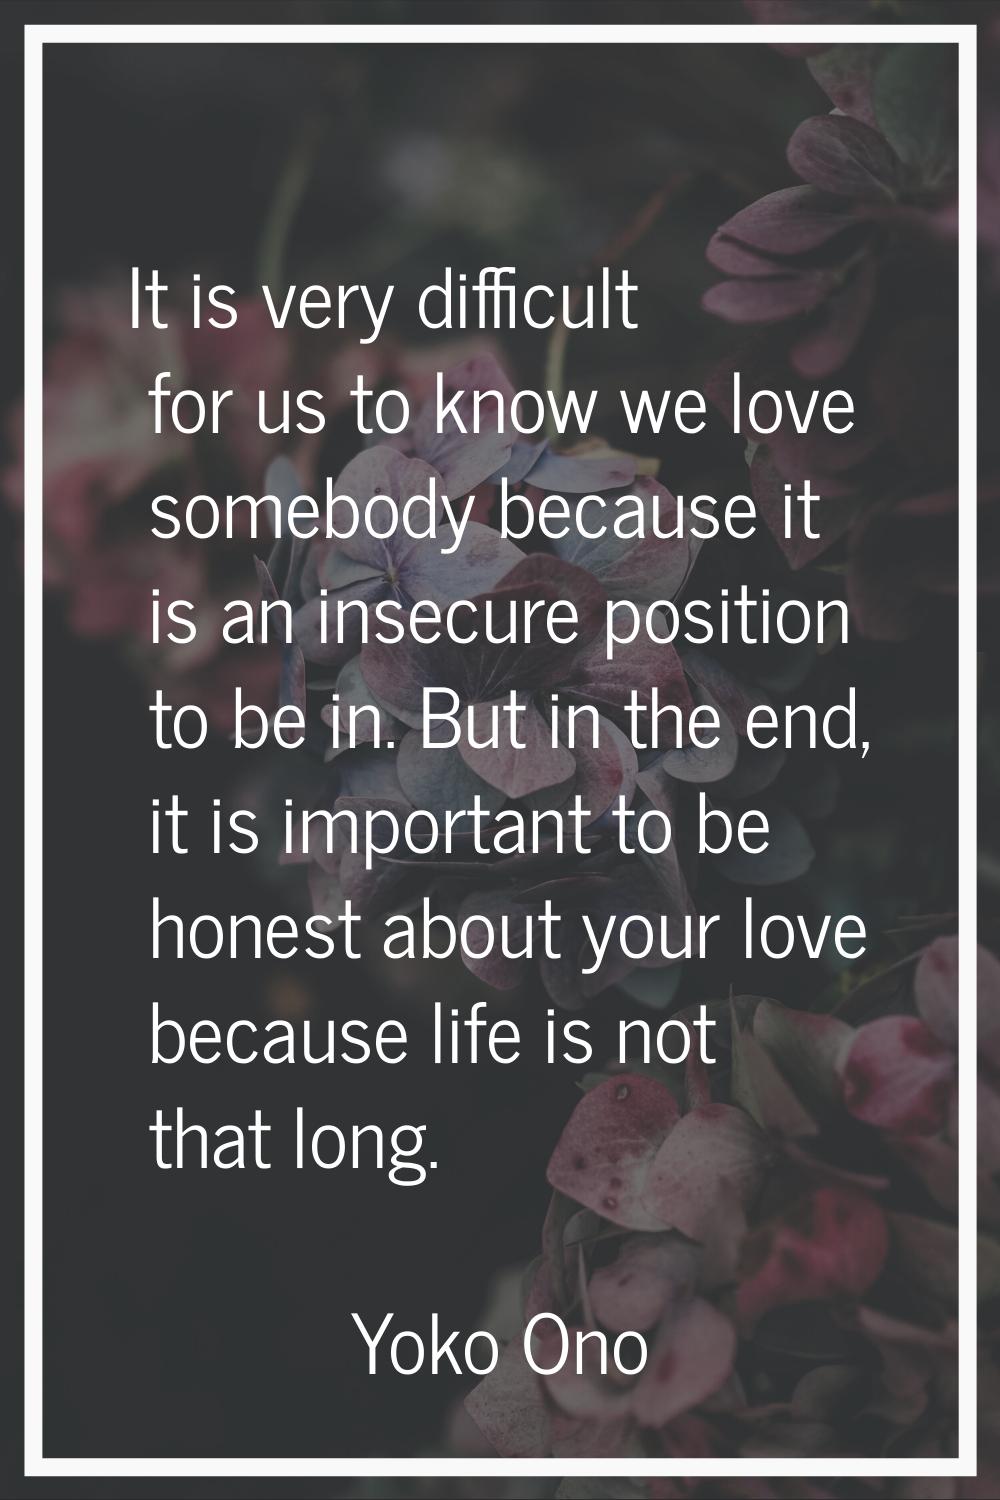 It is very difficult for us to know we love somebody because it is an insecure position to be in. B